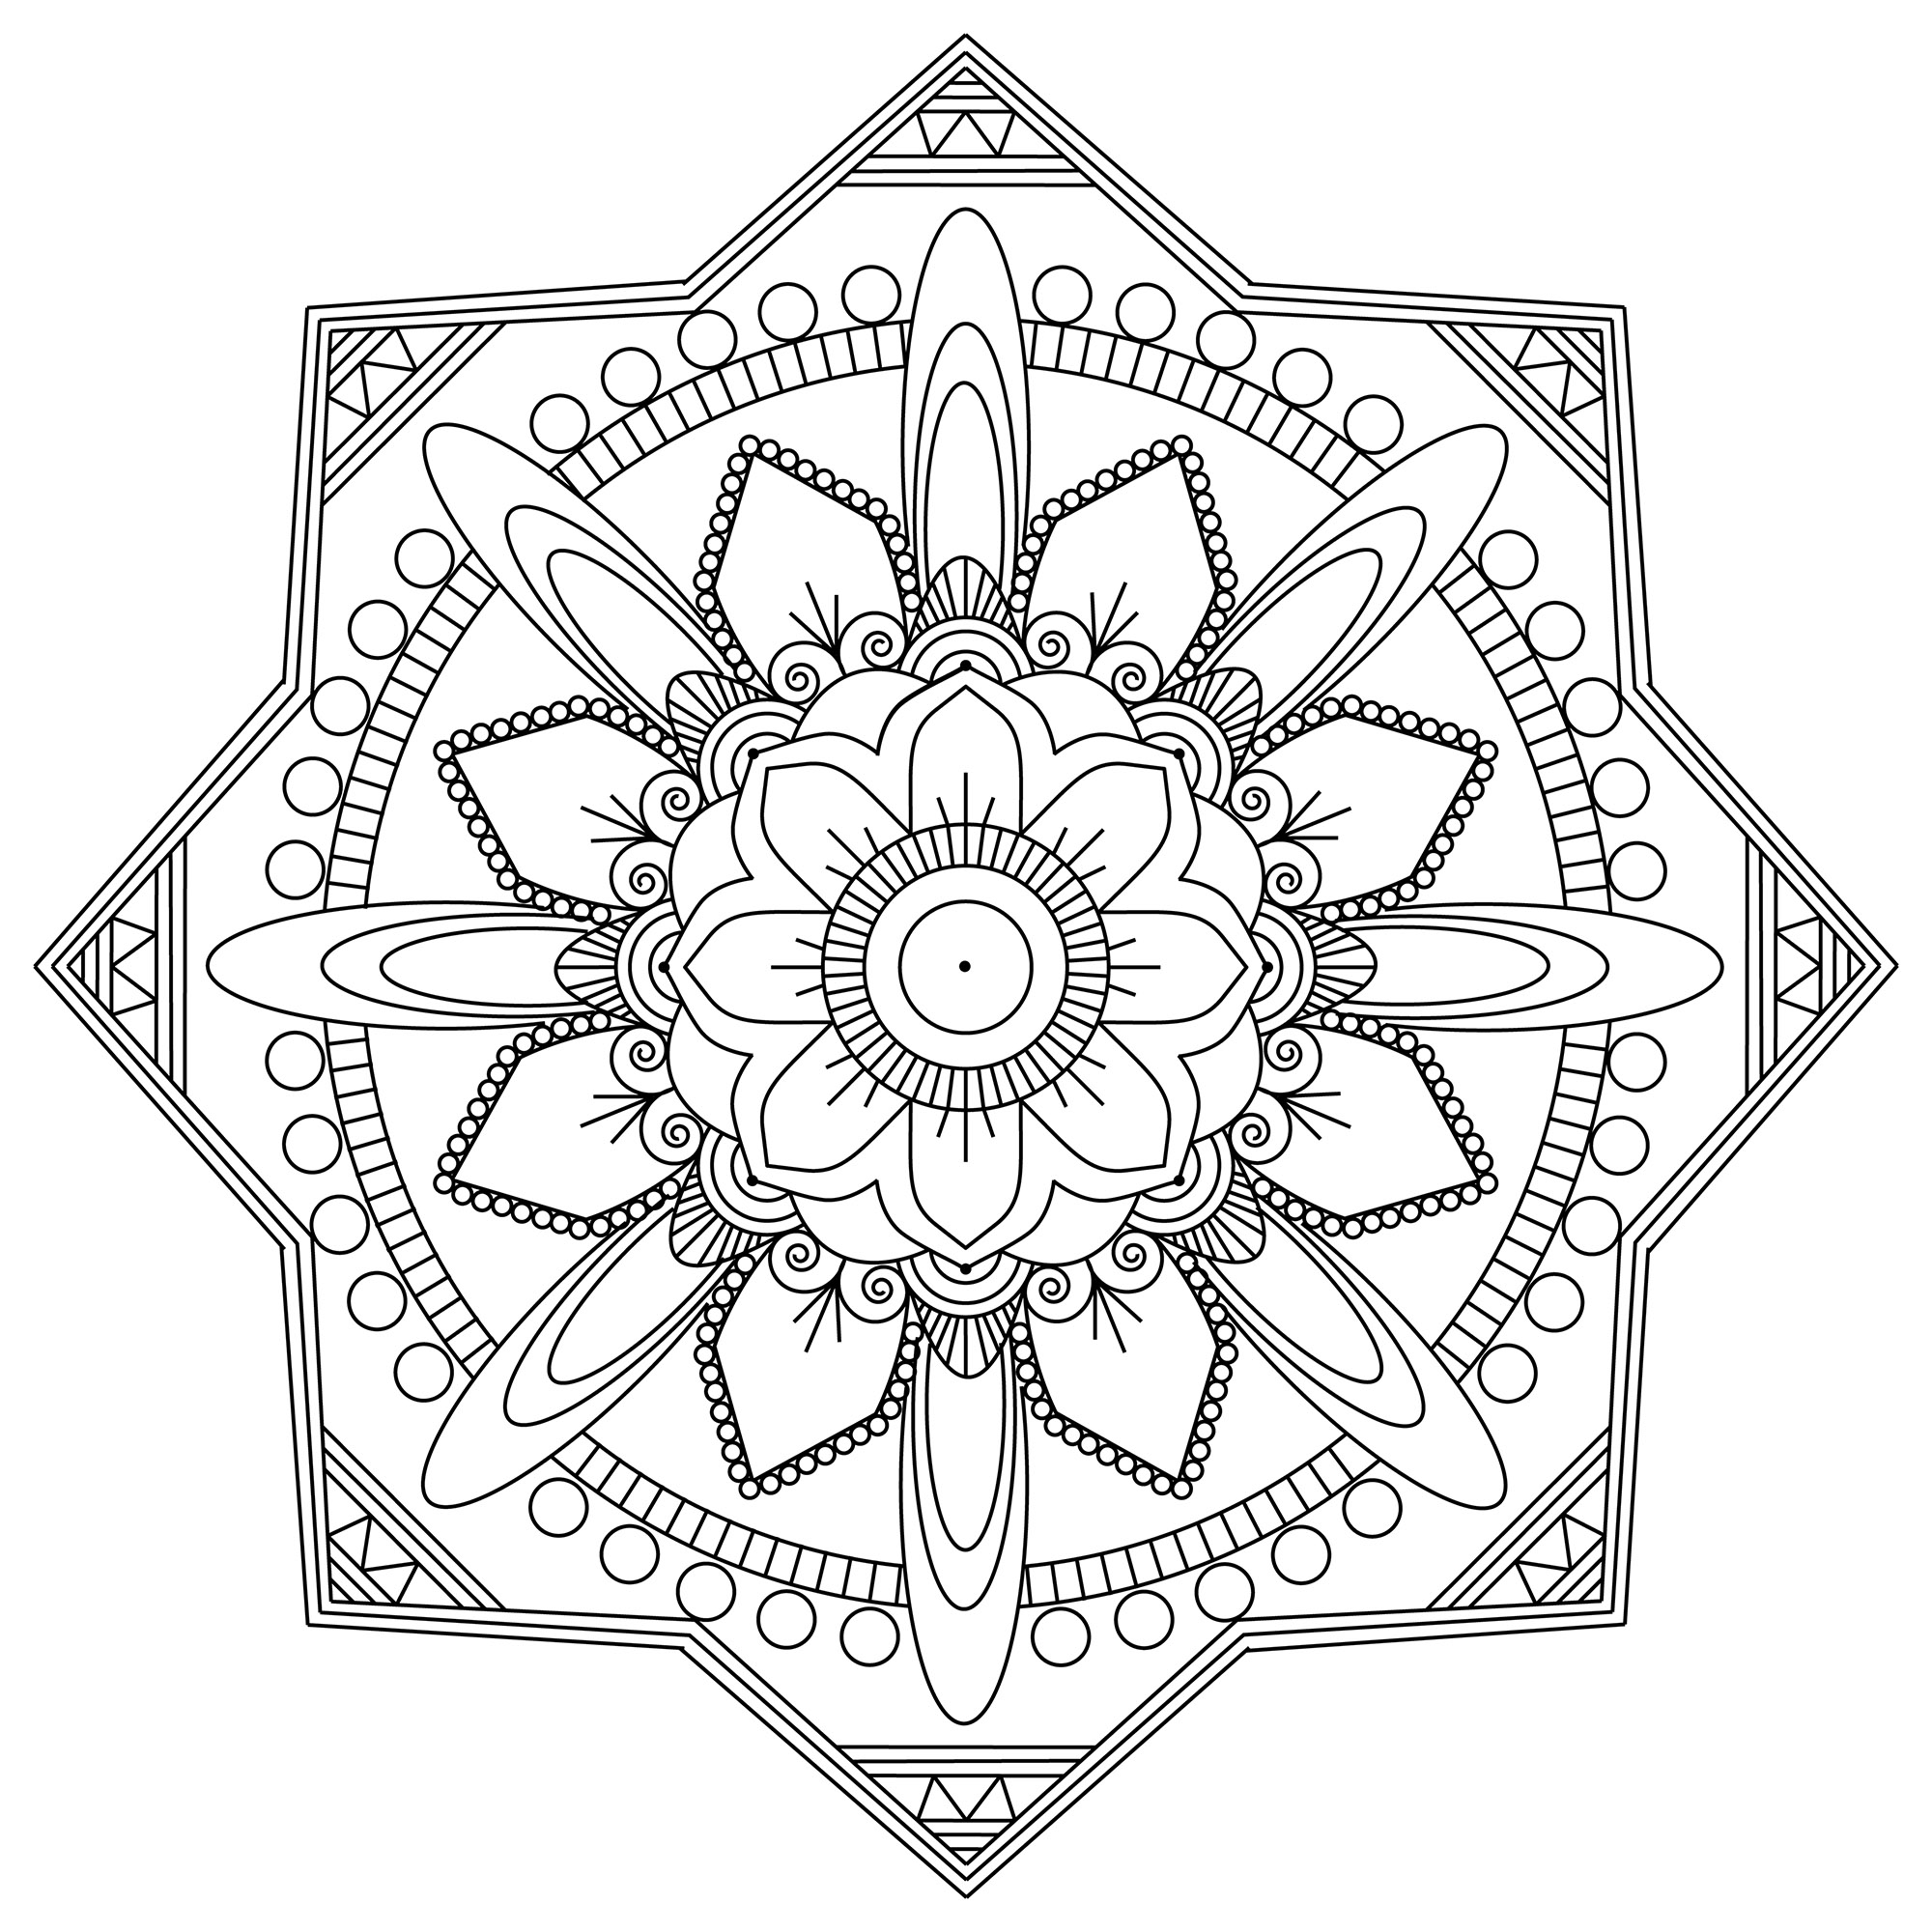 Exclusive Mandala, with squares and circular patterns